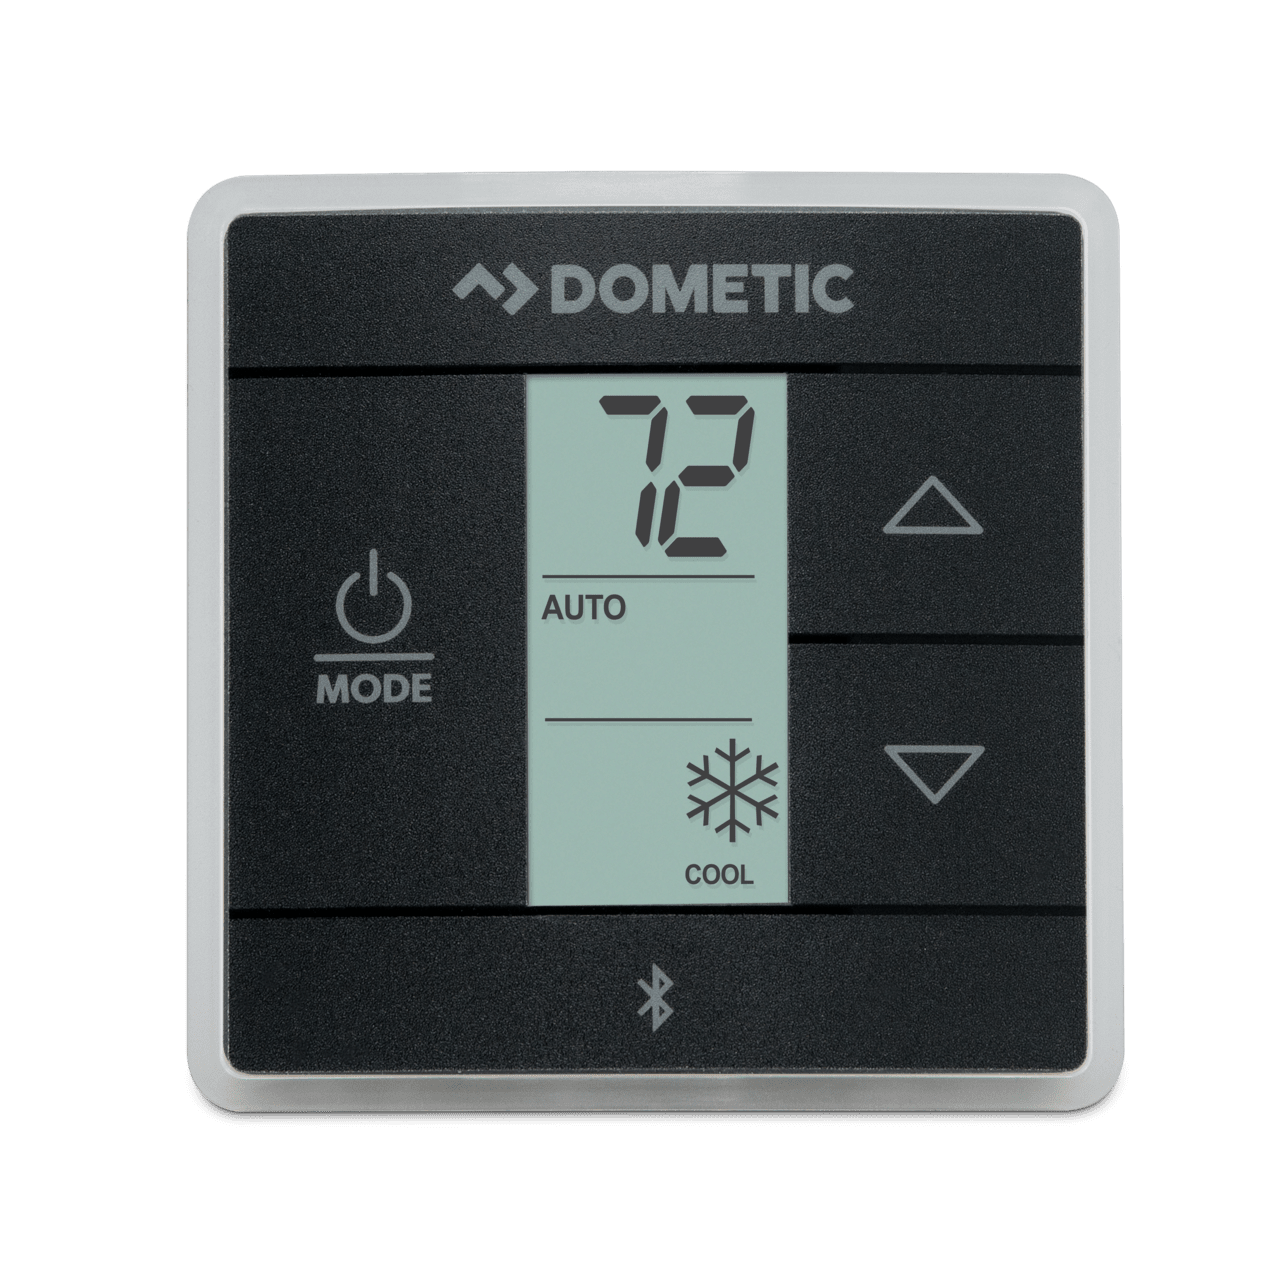 Capacitive touch thermostat